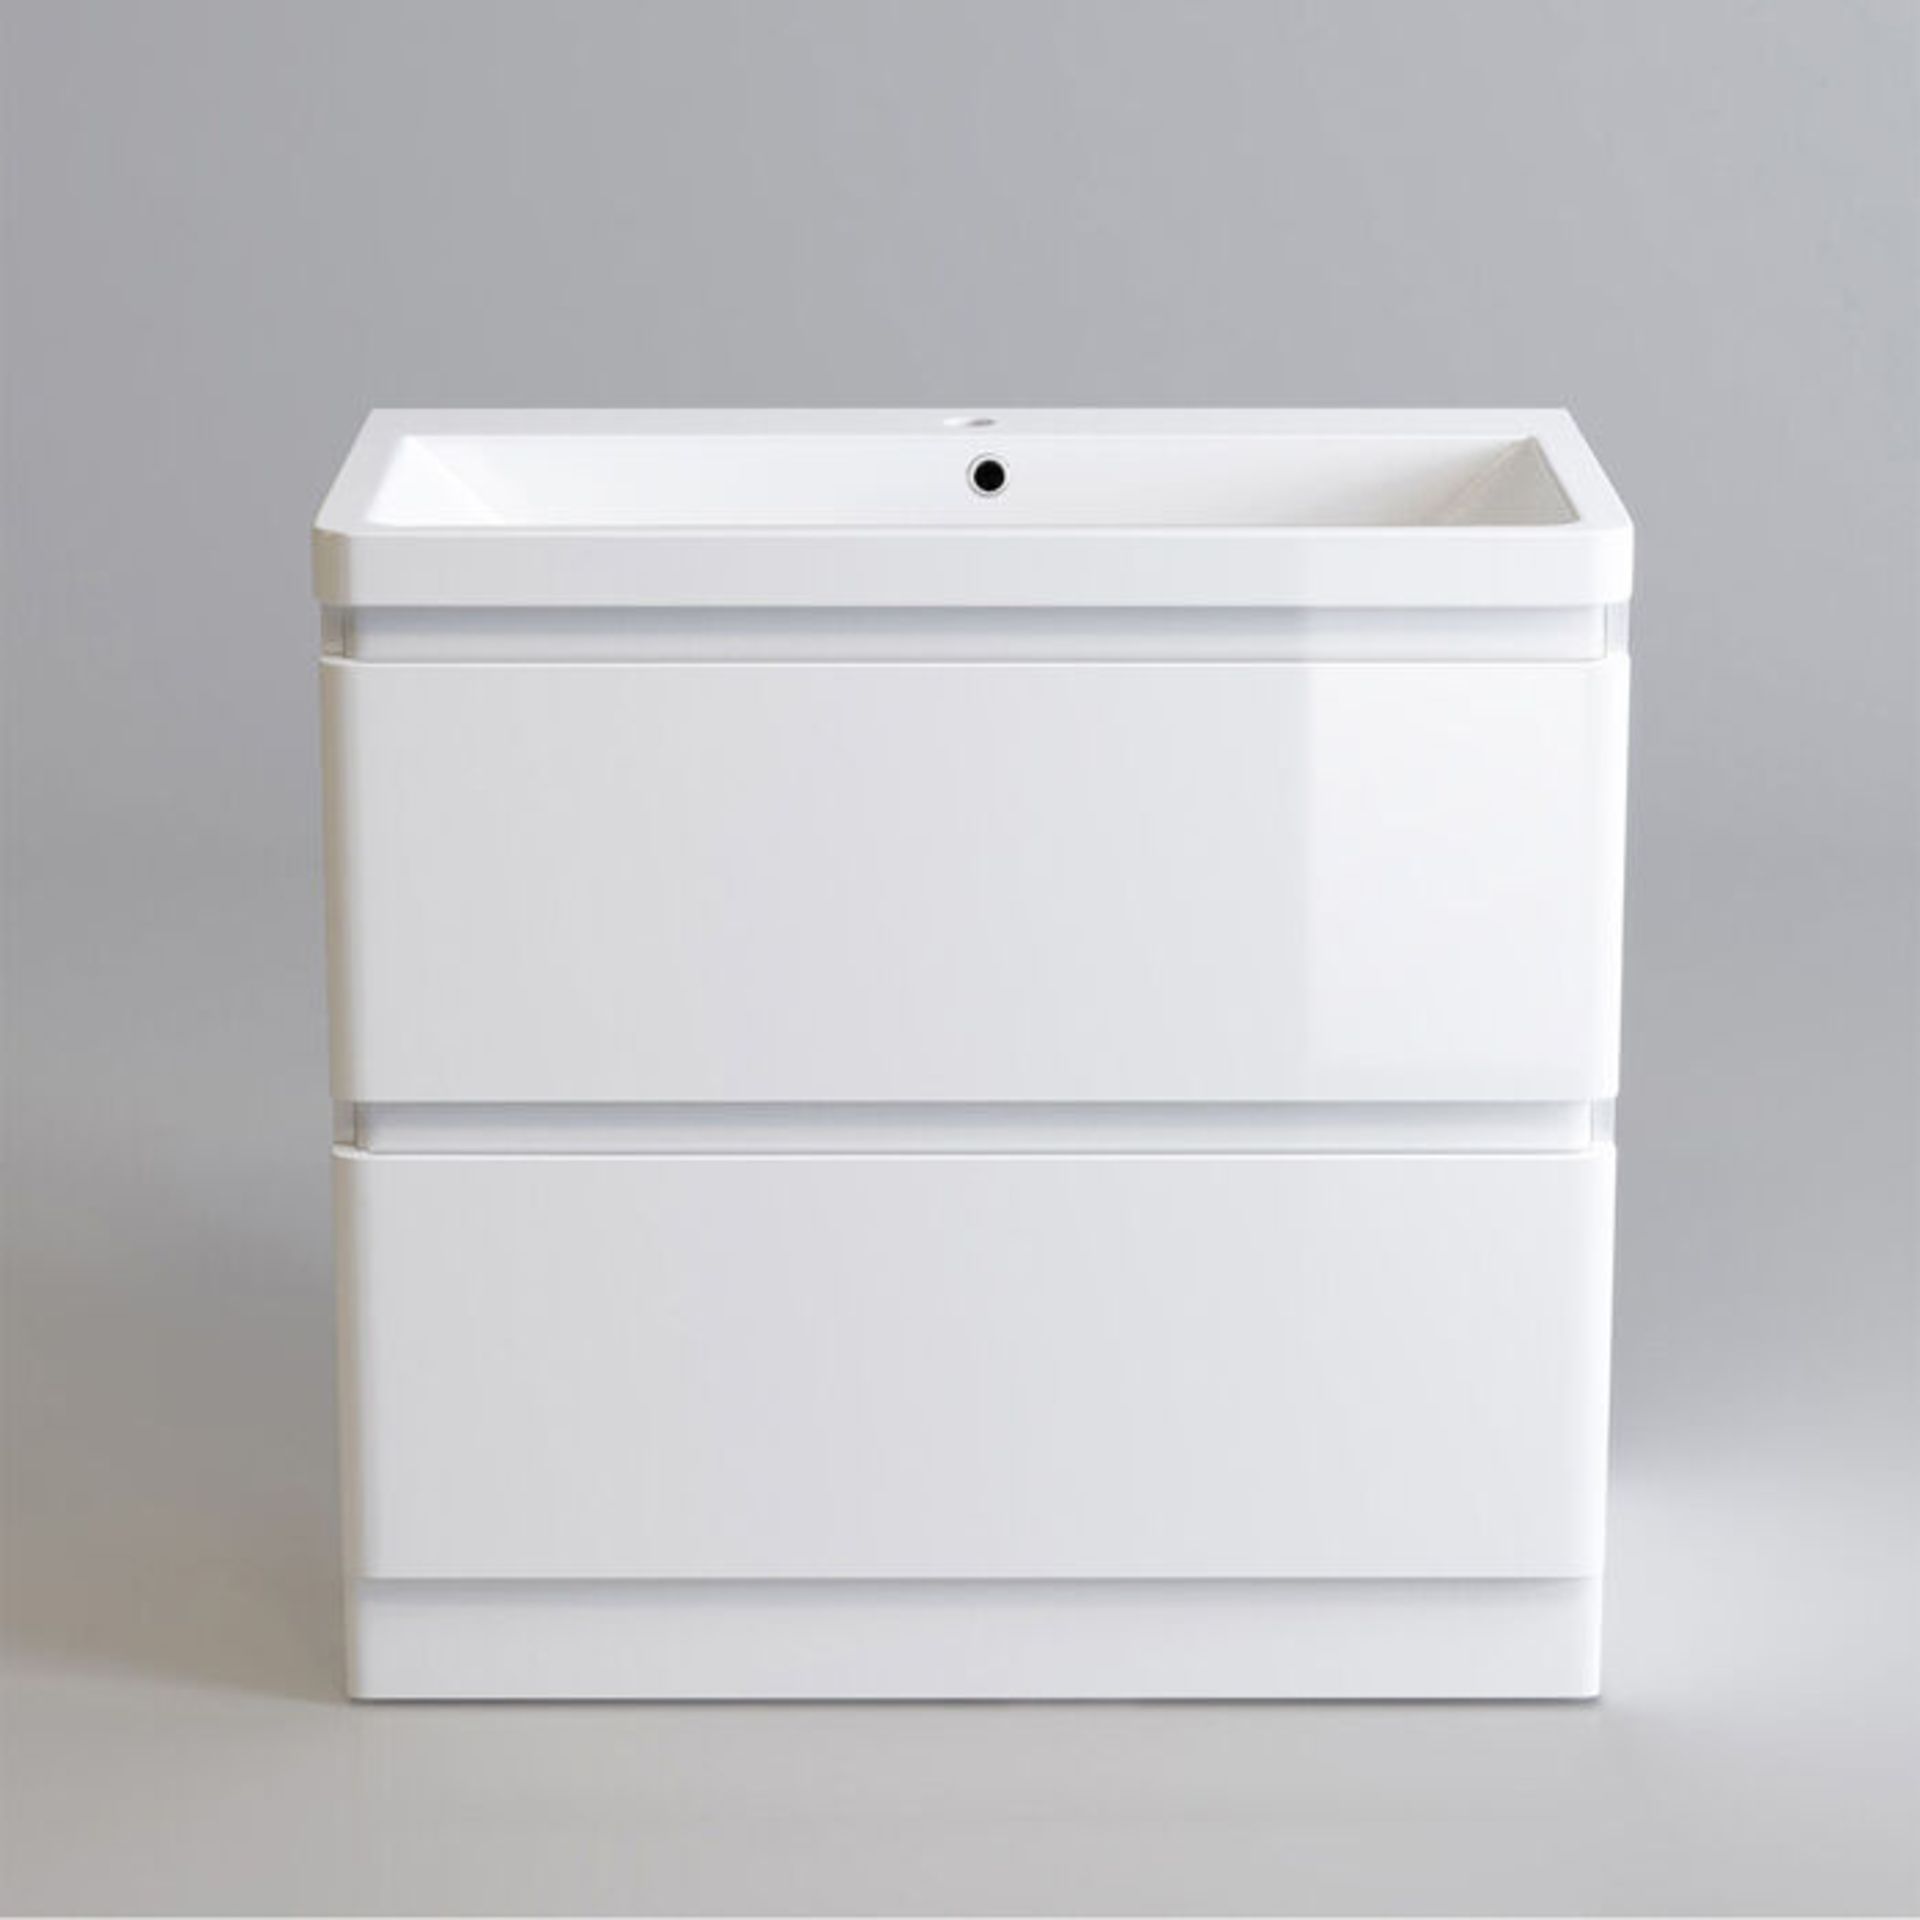 (PC29) 800mm Denver Gloss White Built In Sink Drawer Unit - Floor Standing. RRP £649.99. Comes...( - Image 5 of 5